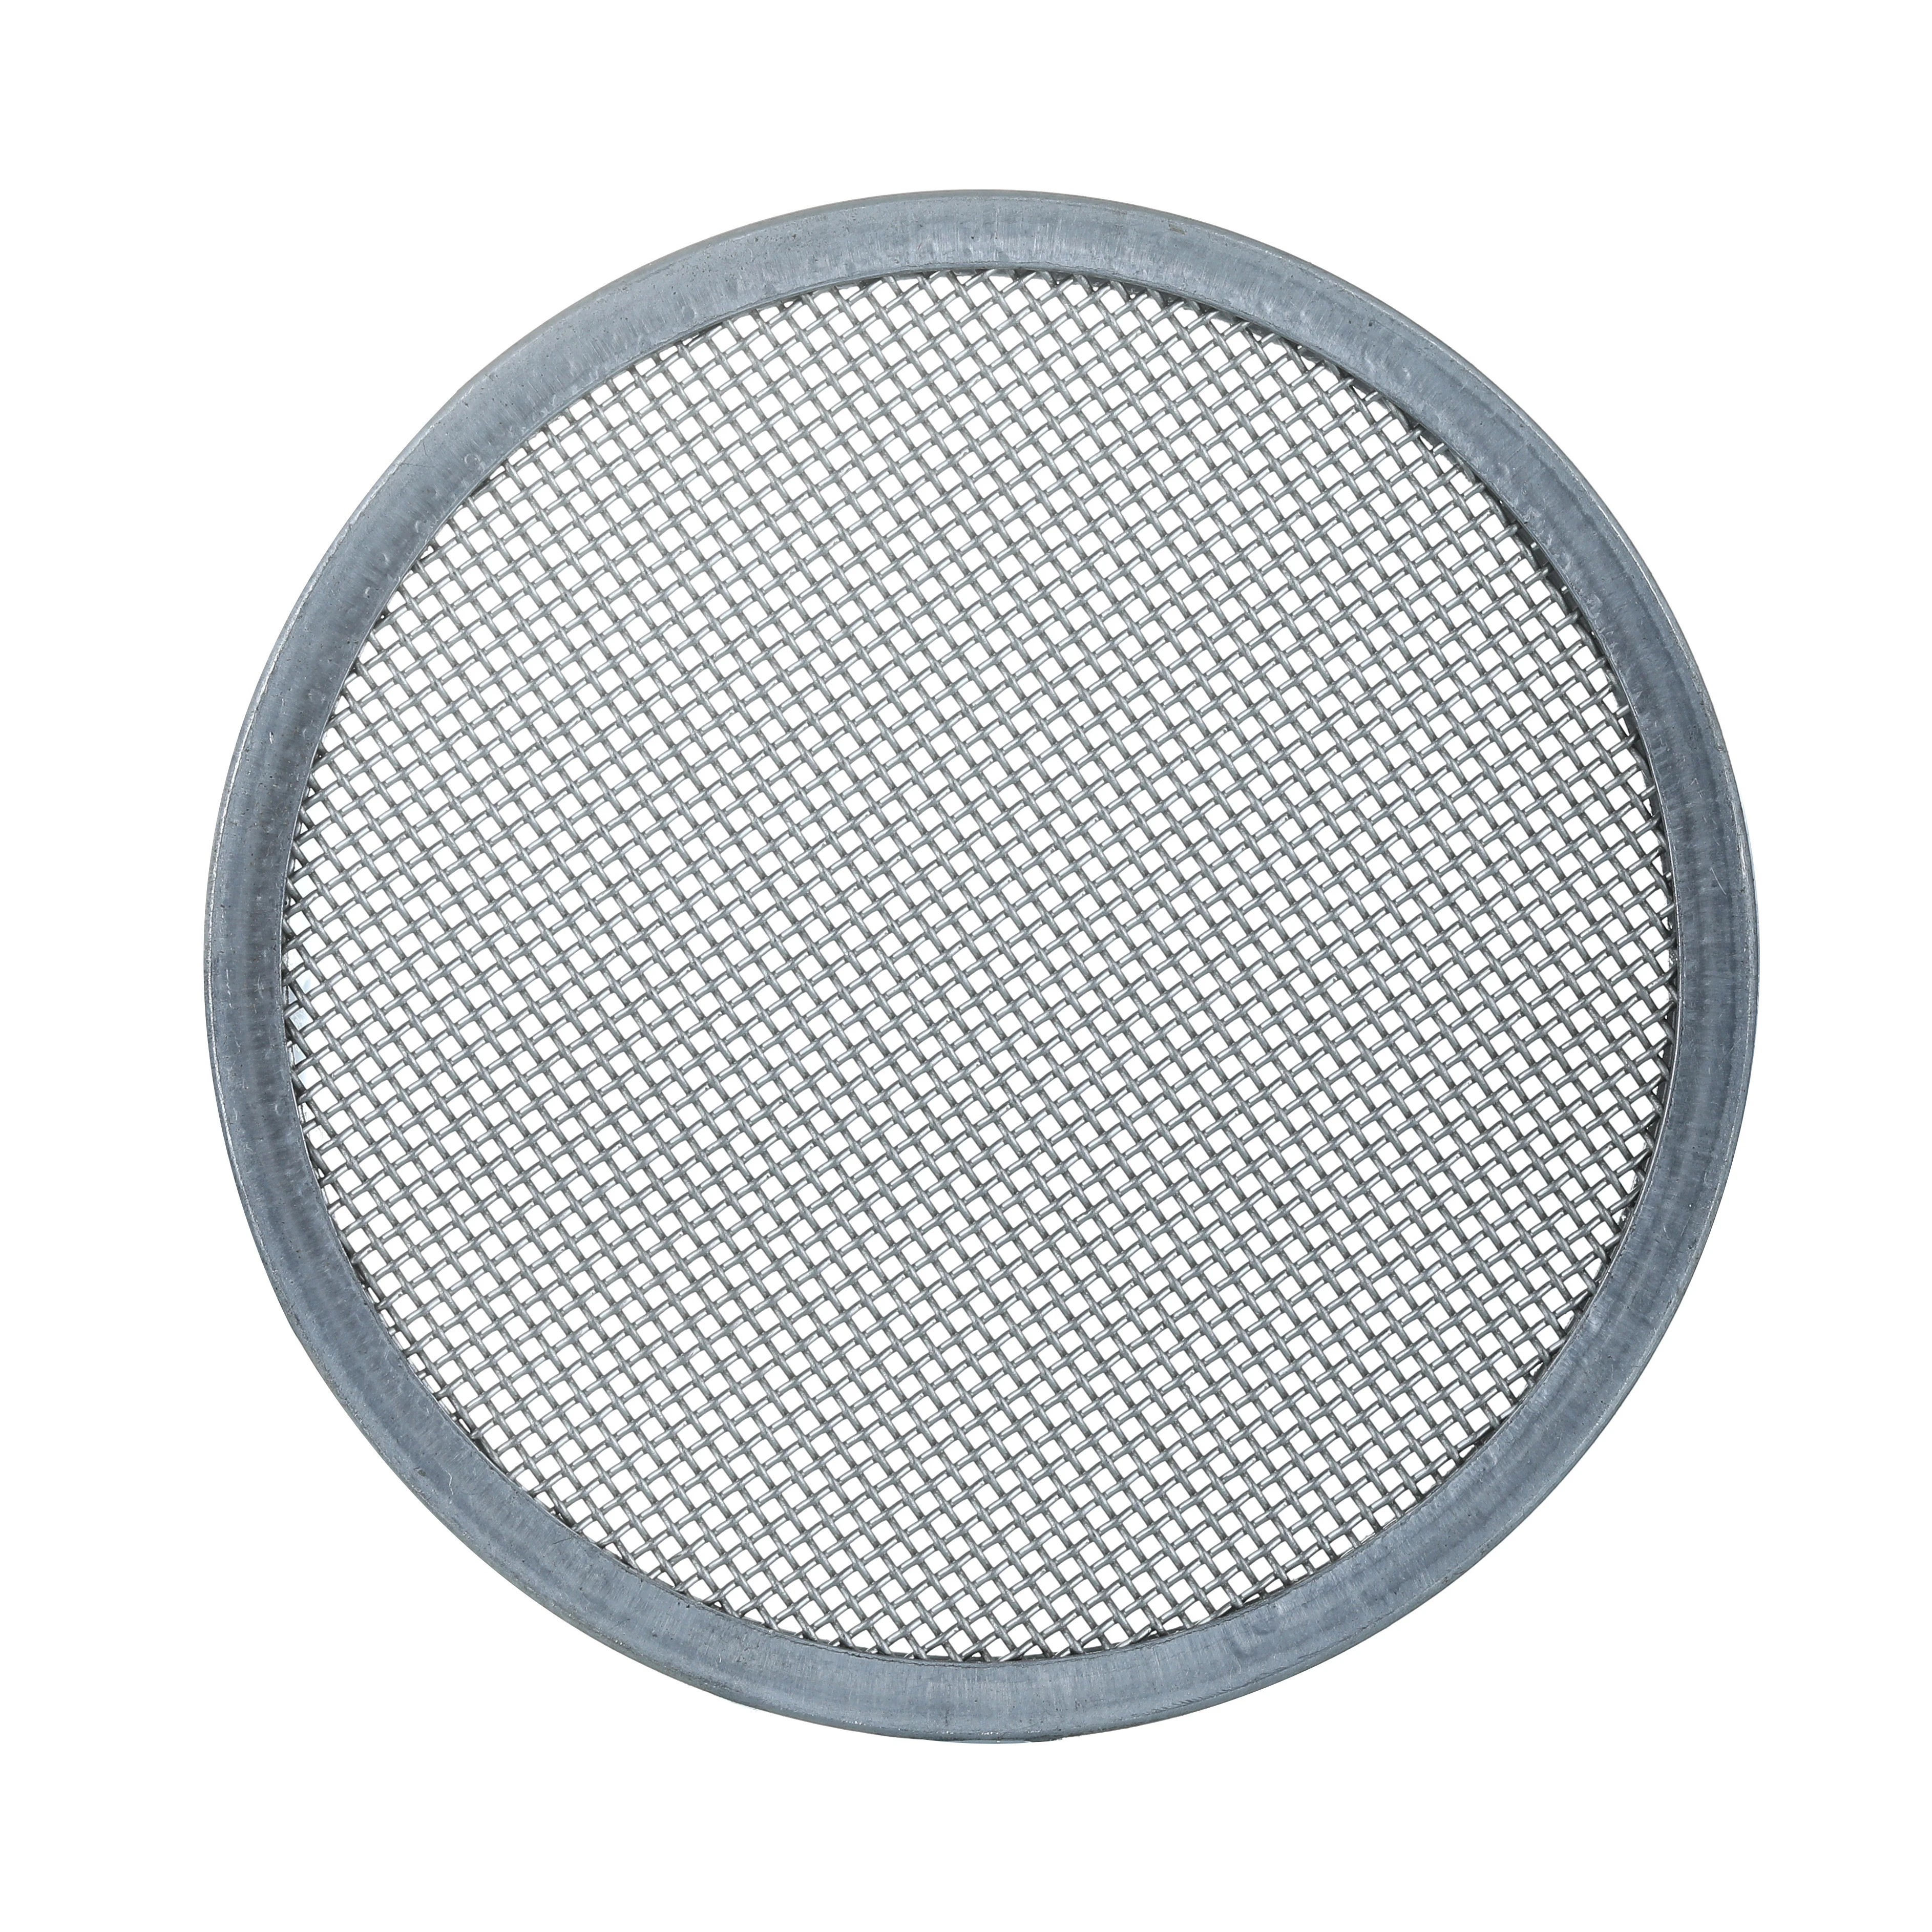 Stainless steel edge filter screen circular filter braided mesh  other special shape can be made as per